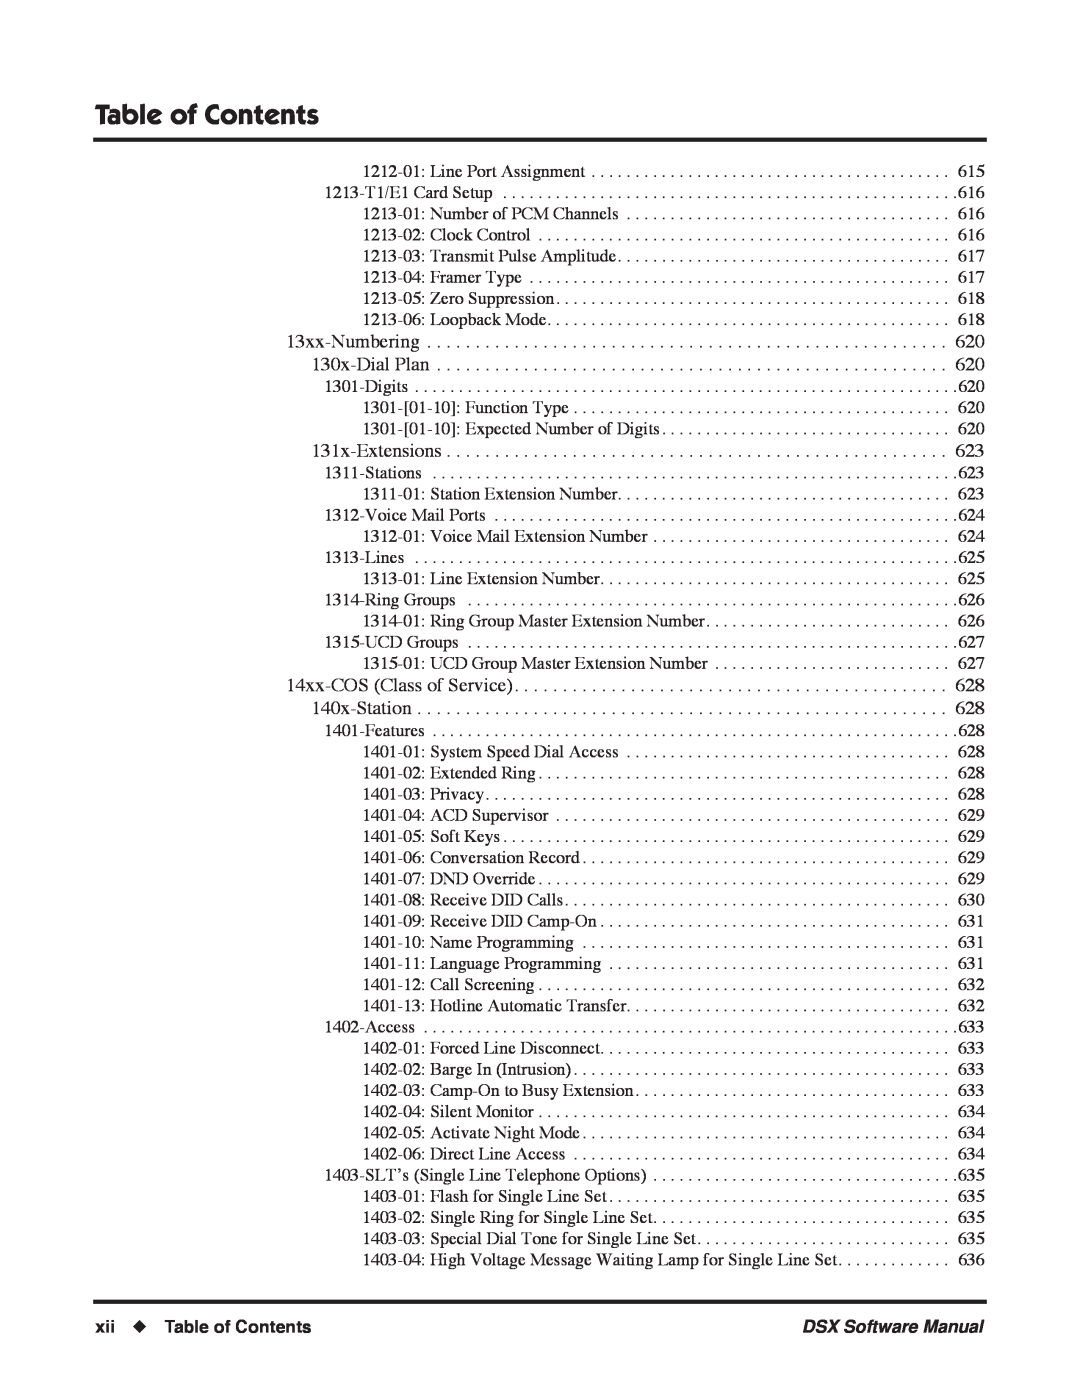 NEC N 1093100, P software manual xii Table of Contents, DSX Software Manual 